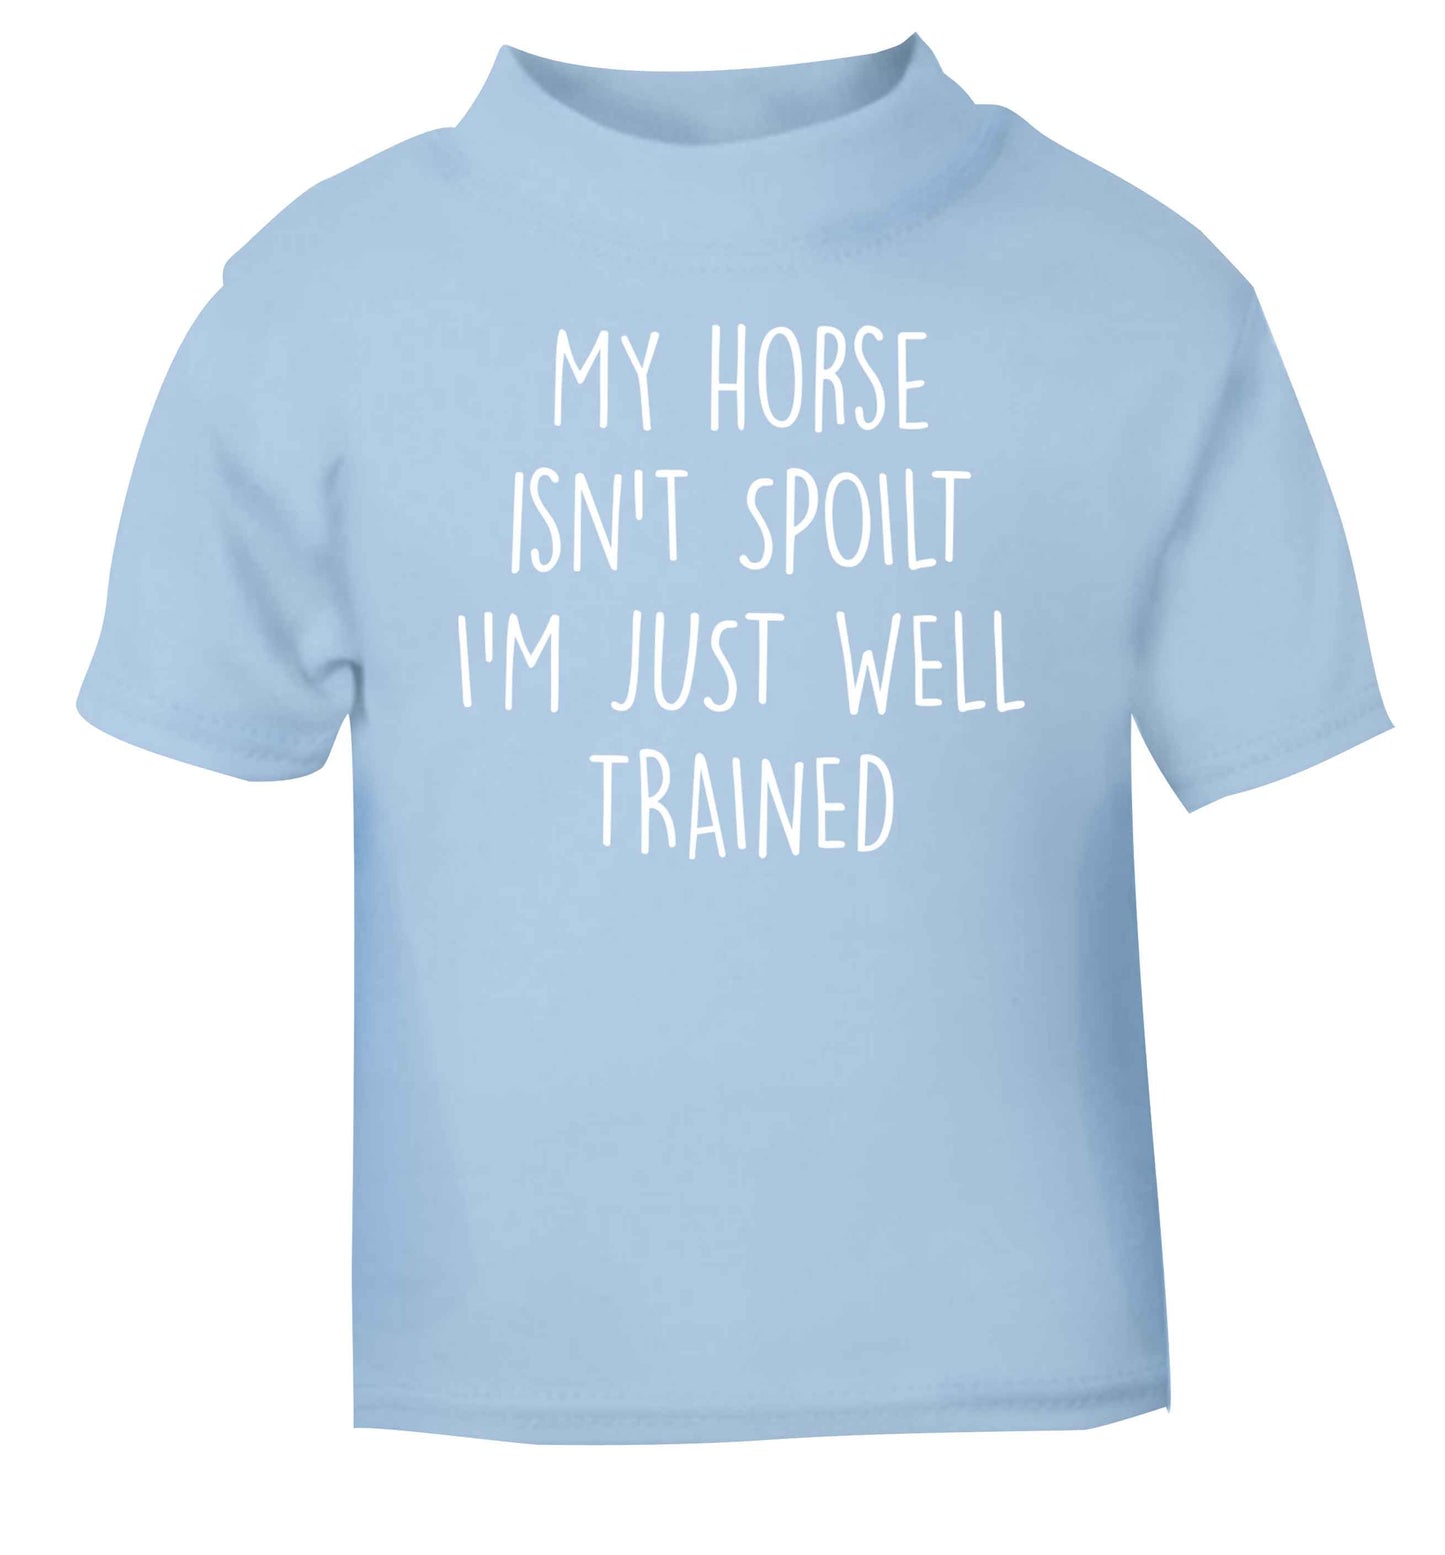 My horse isn't spoilt I'm just well trained light blue baby toddler Tshirt 2 Years